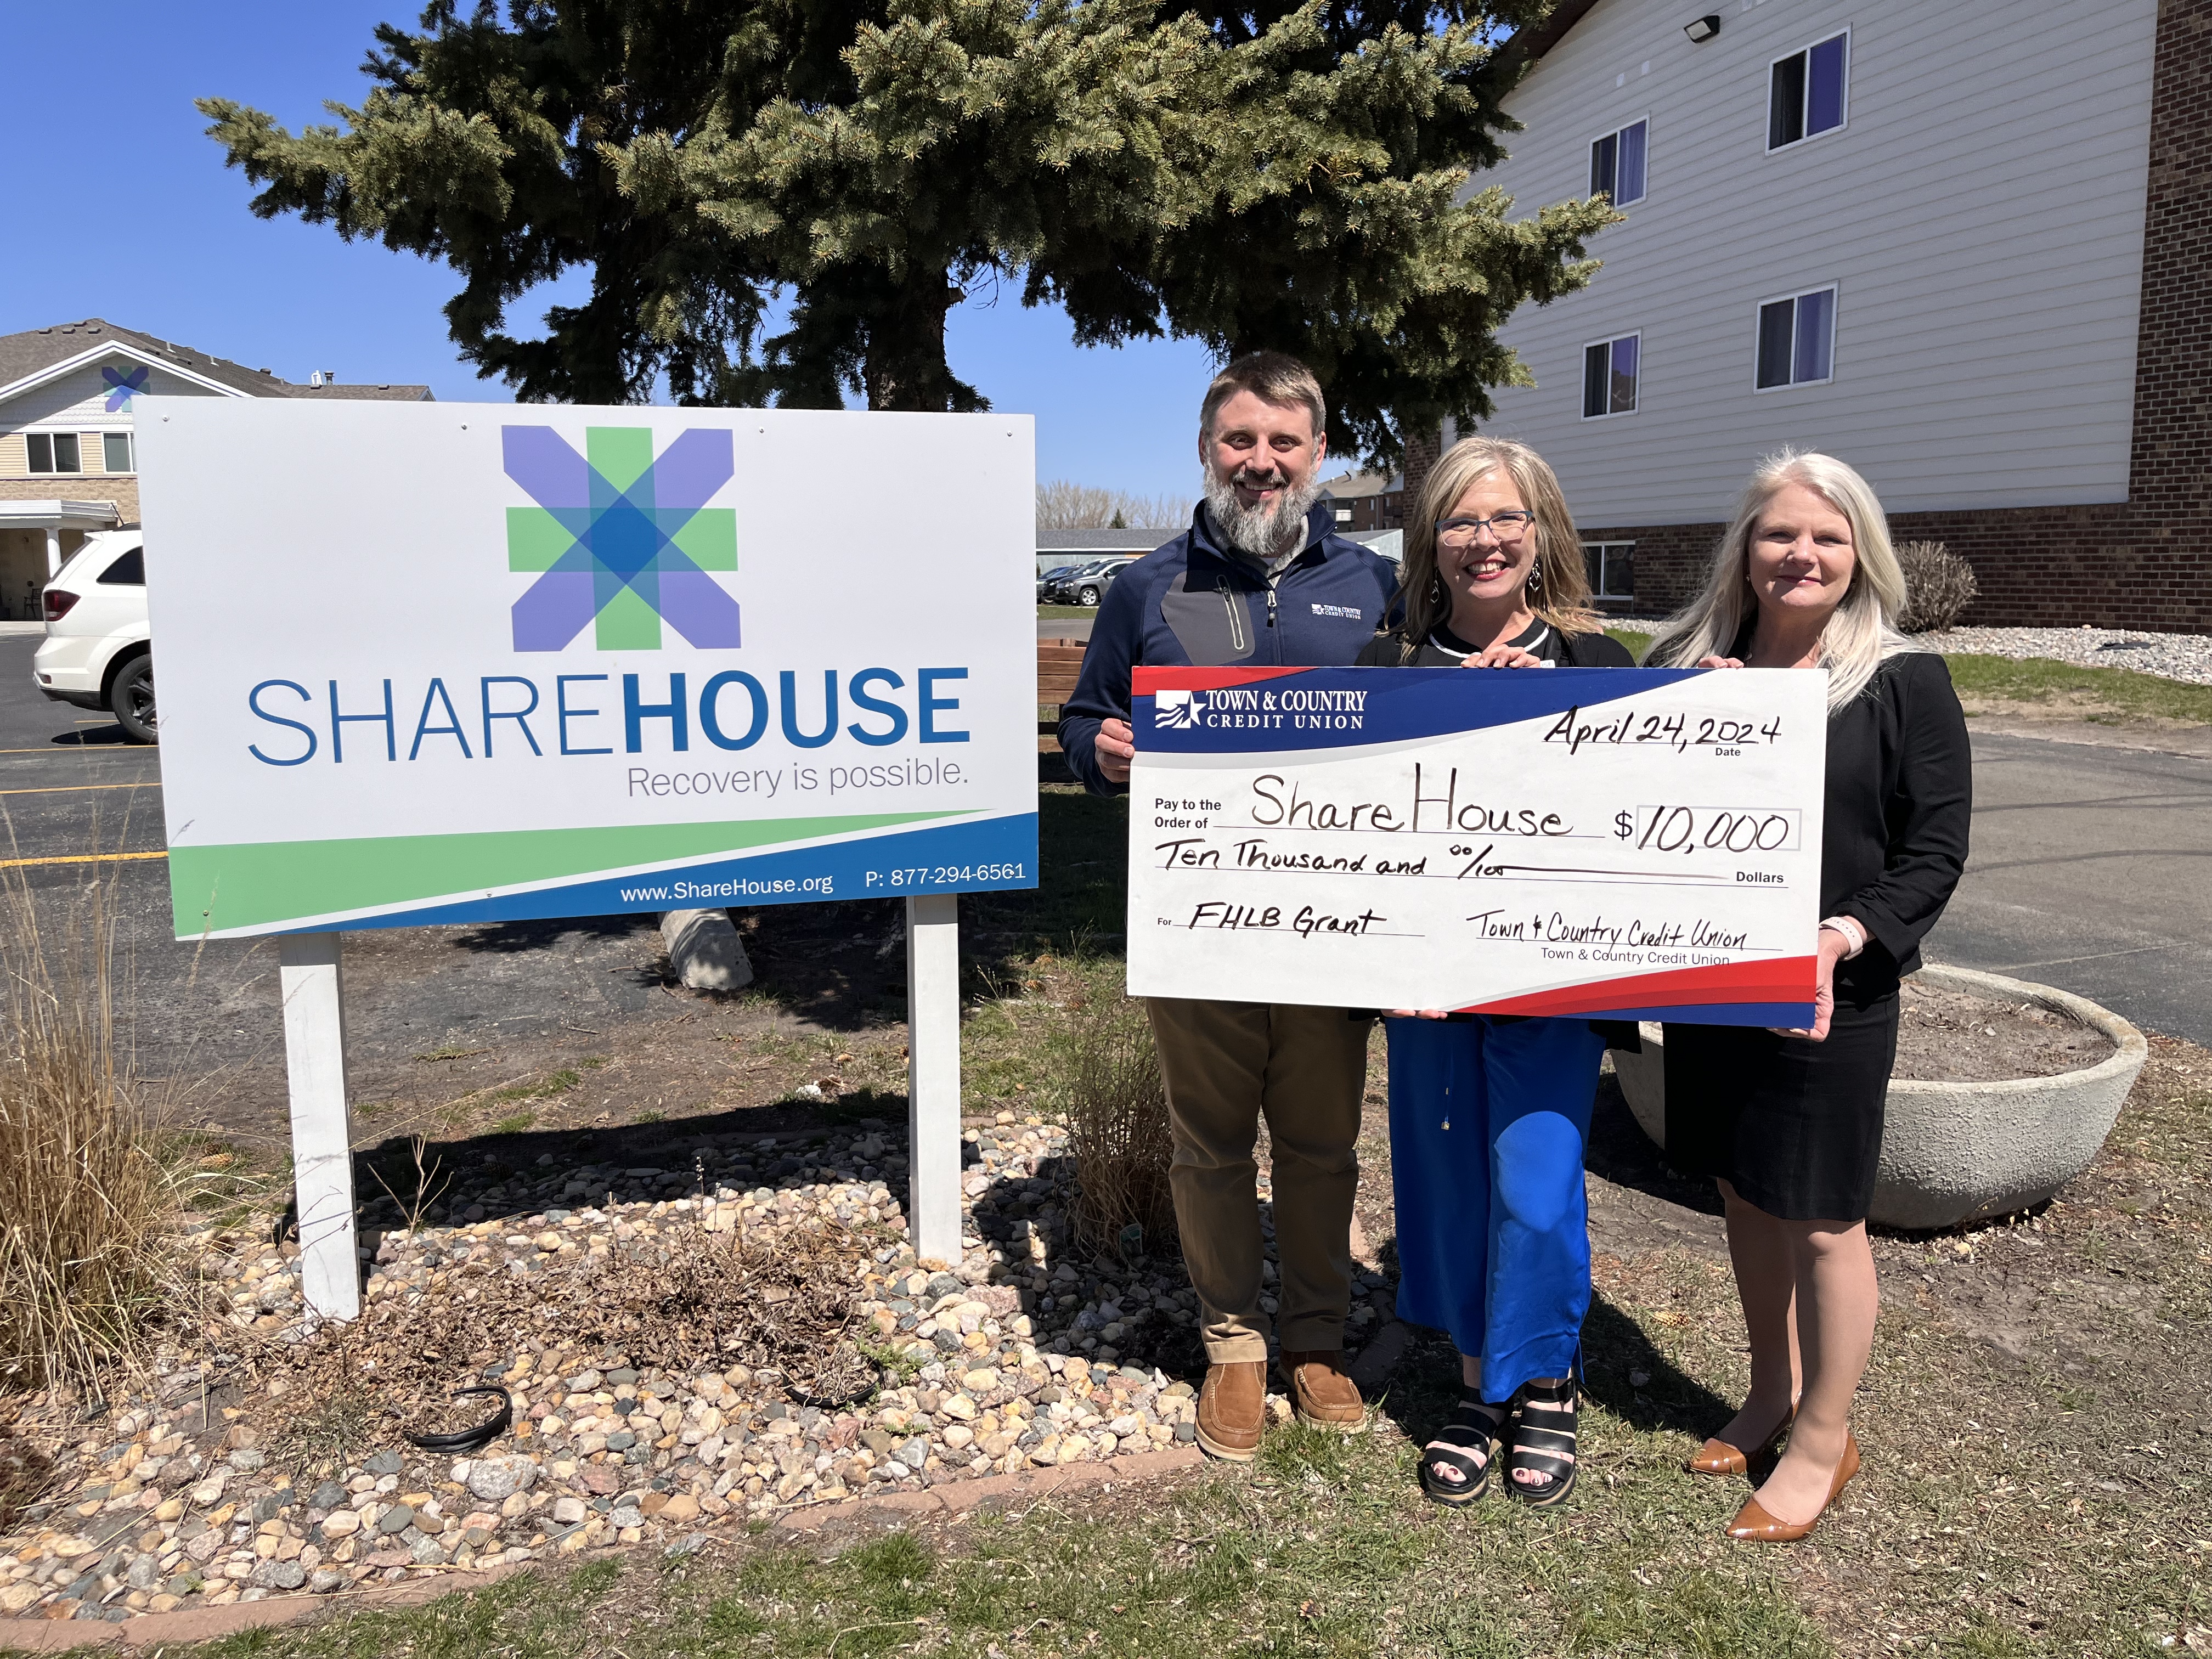 Photo of Town & Country and ShareHouse Representatives holding a large check for $10,000 presented to ShareHouse for a FHLB Grant